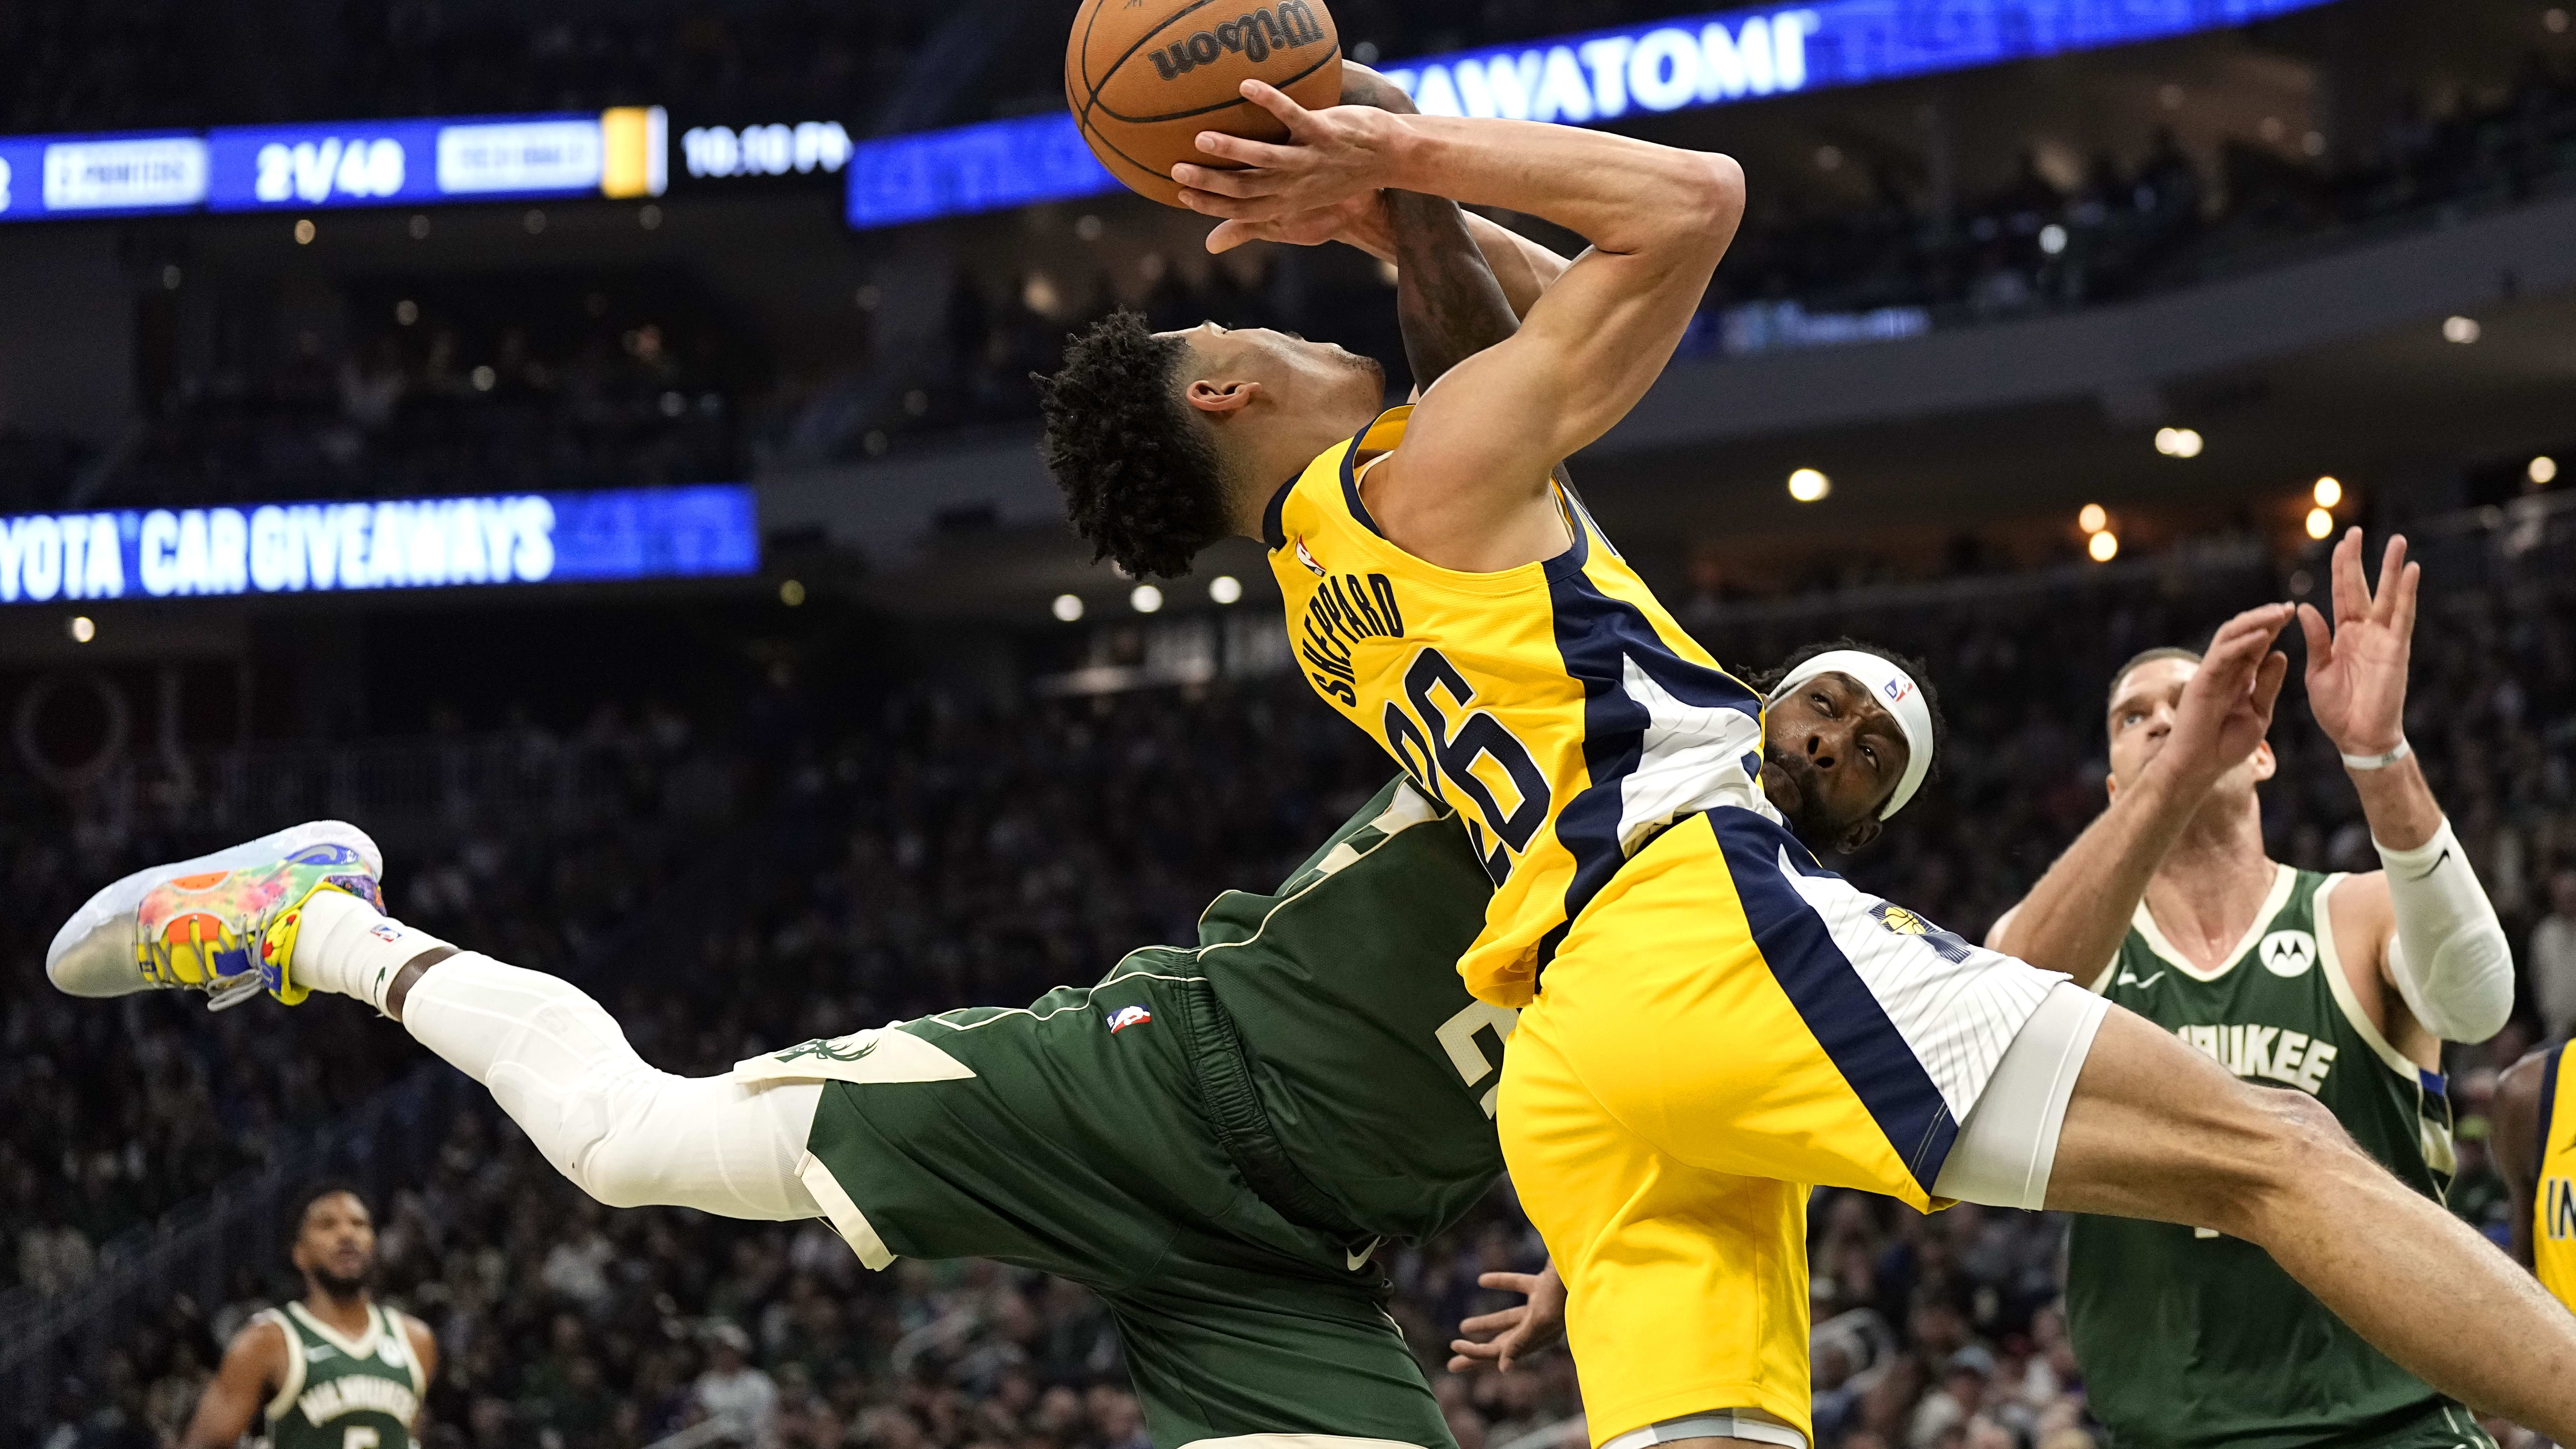 Indiana Pacers vs Milwaukee Bucks Game 6 preview: Start time, where to watch, injury report, betting odds May 2